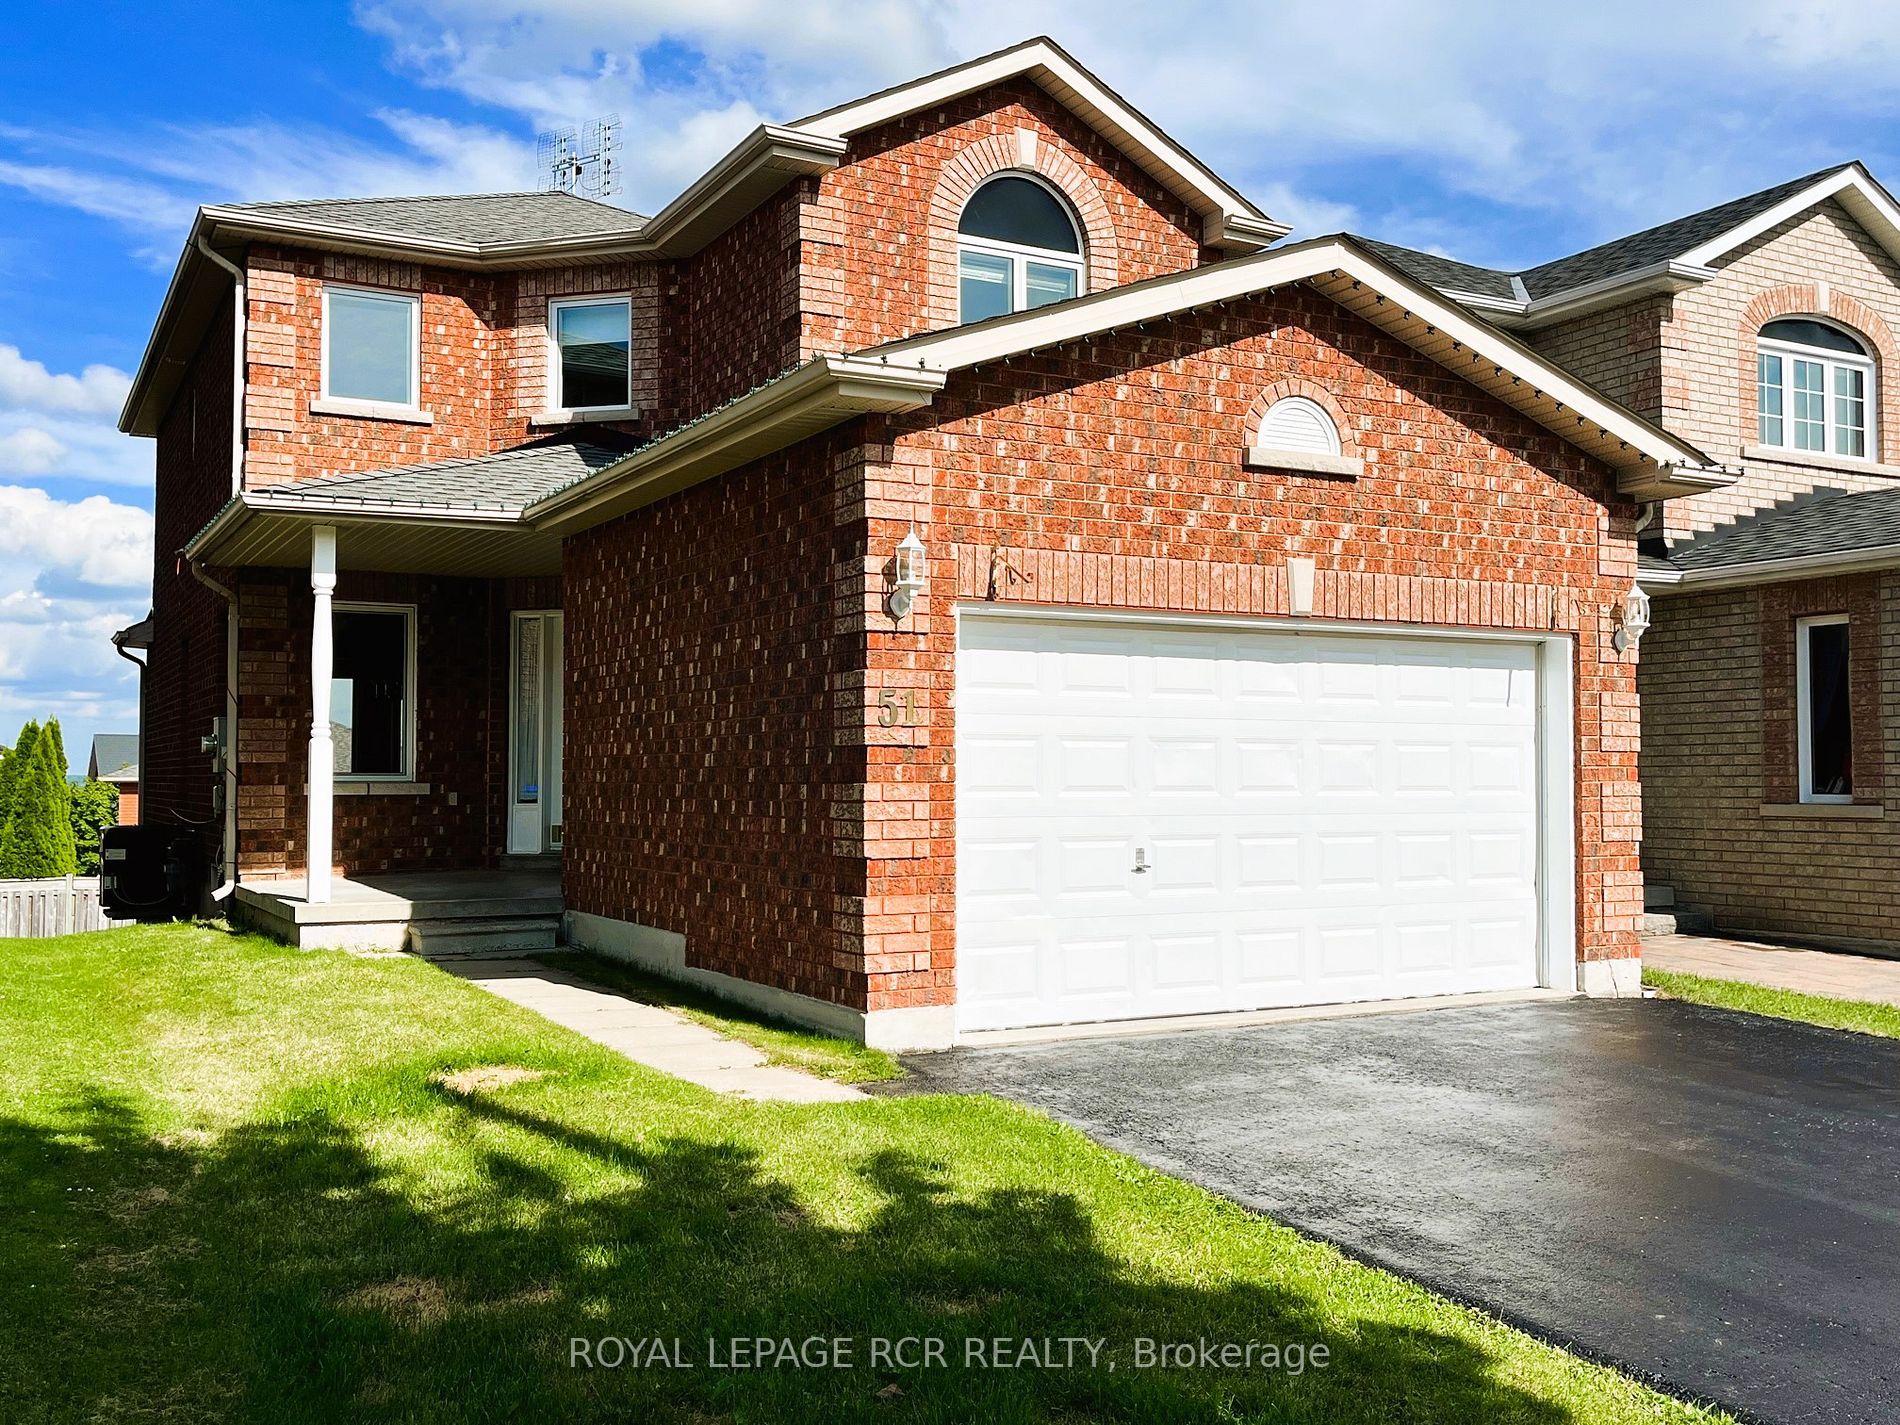 I have sold a property at 51 Smith ST in Bradford West Gwillimbury
